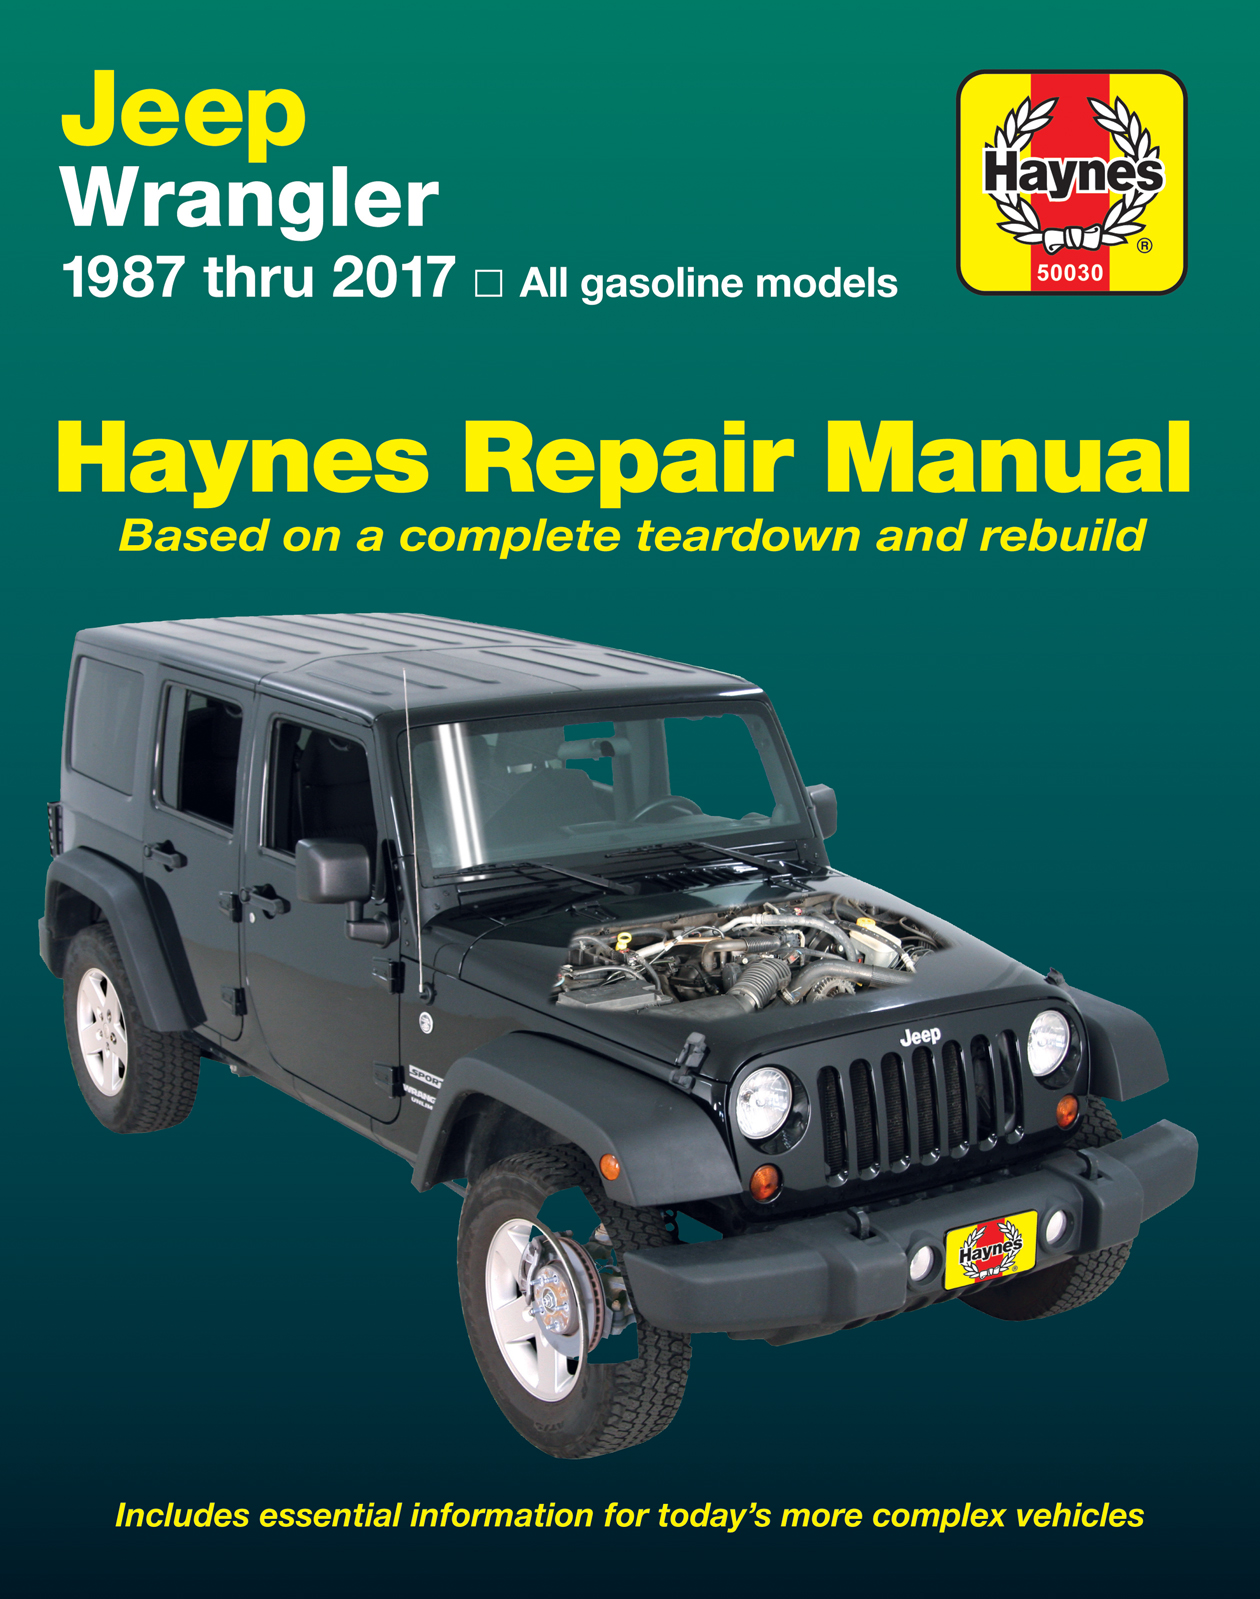 Introduce 61+ images 1993 jeep wrangler service manual - In ...